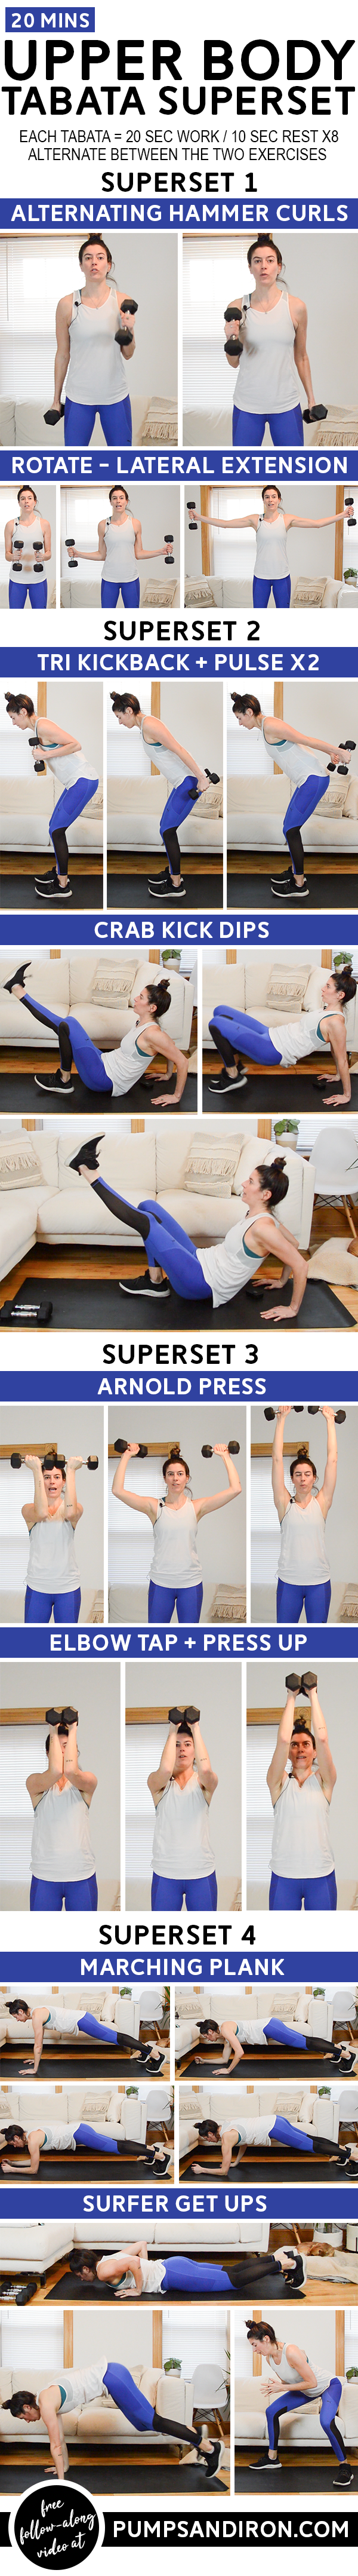 Upper Body Supersets Workout